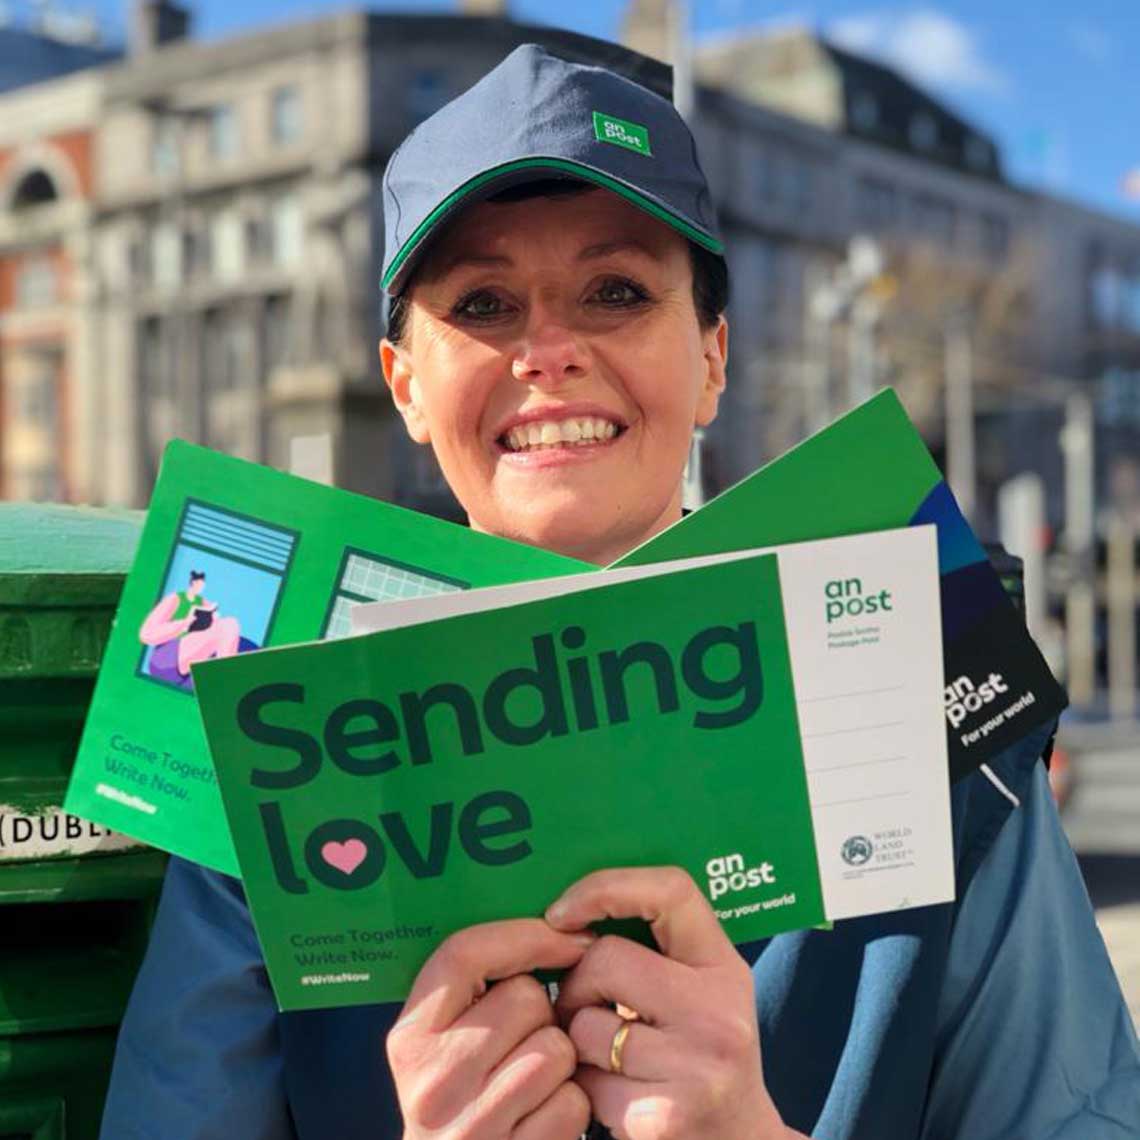 Postal operative holding a send love postcard standing in front of a postbox